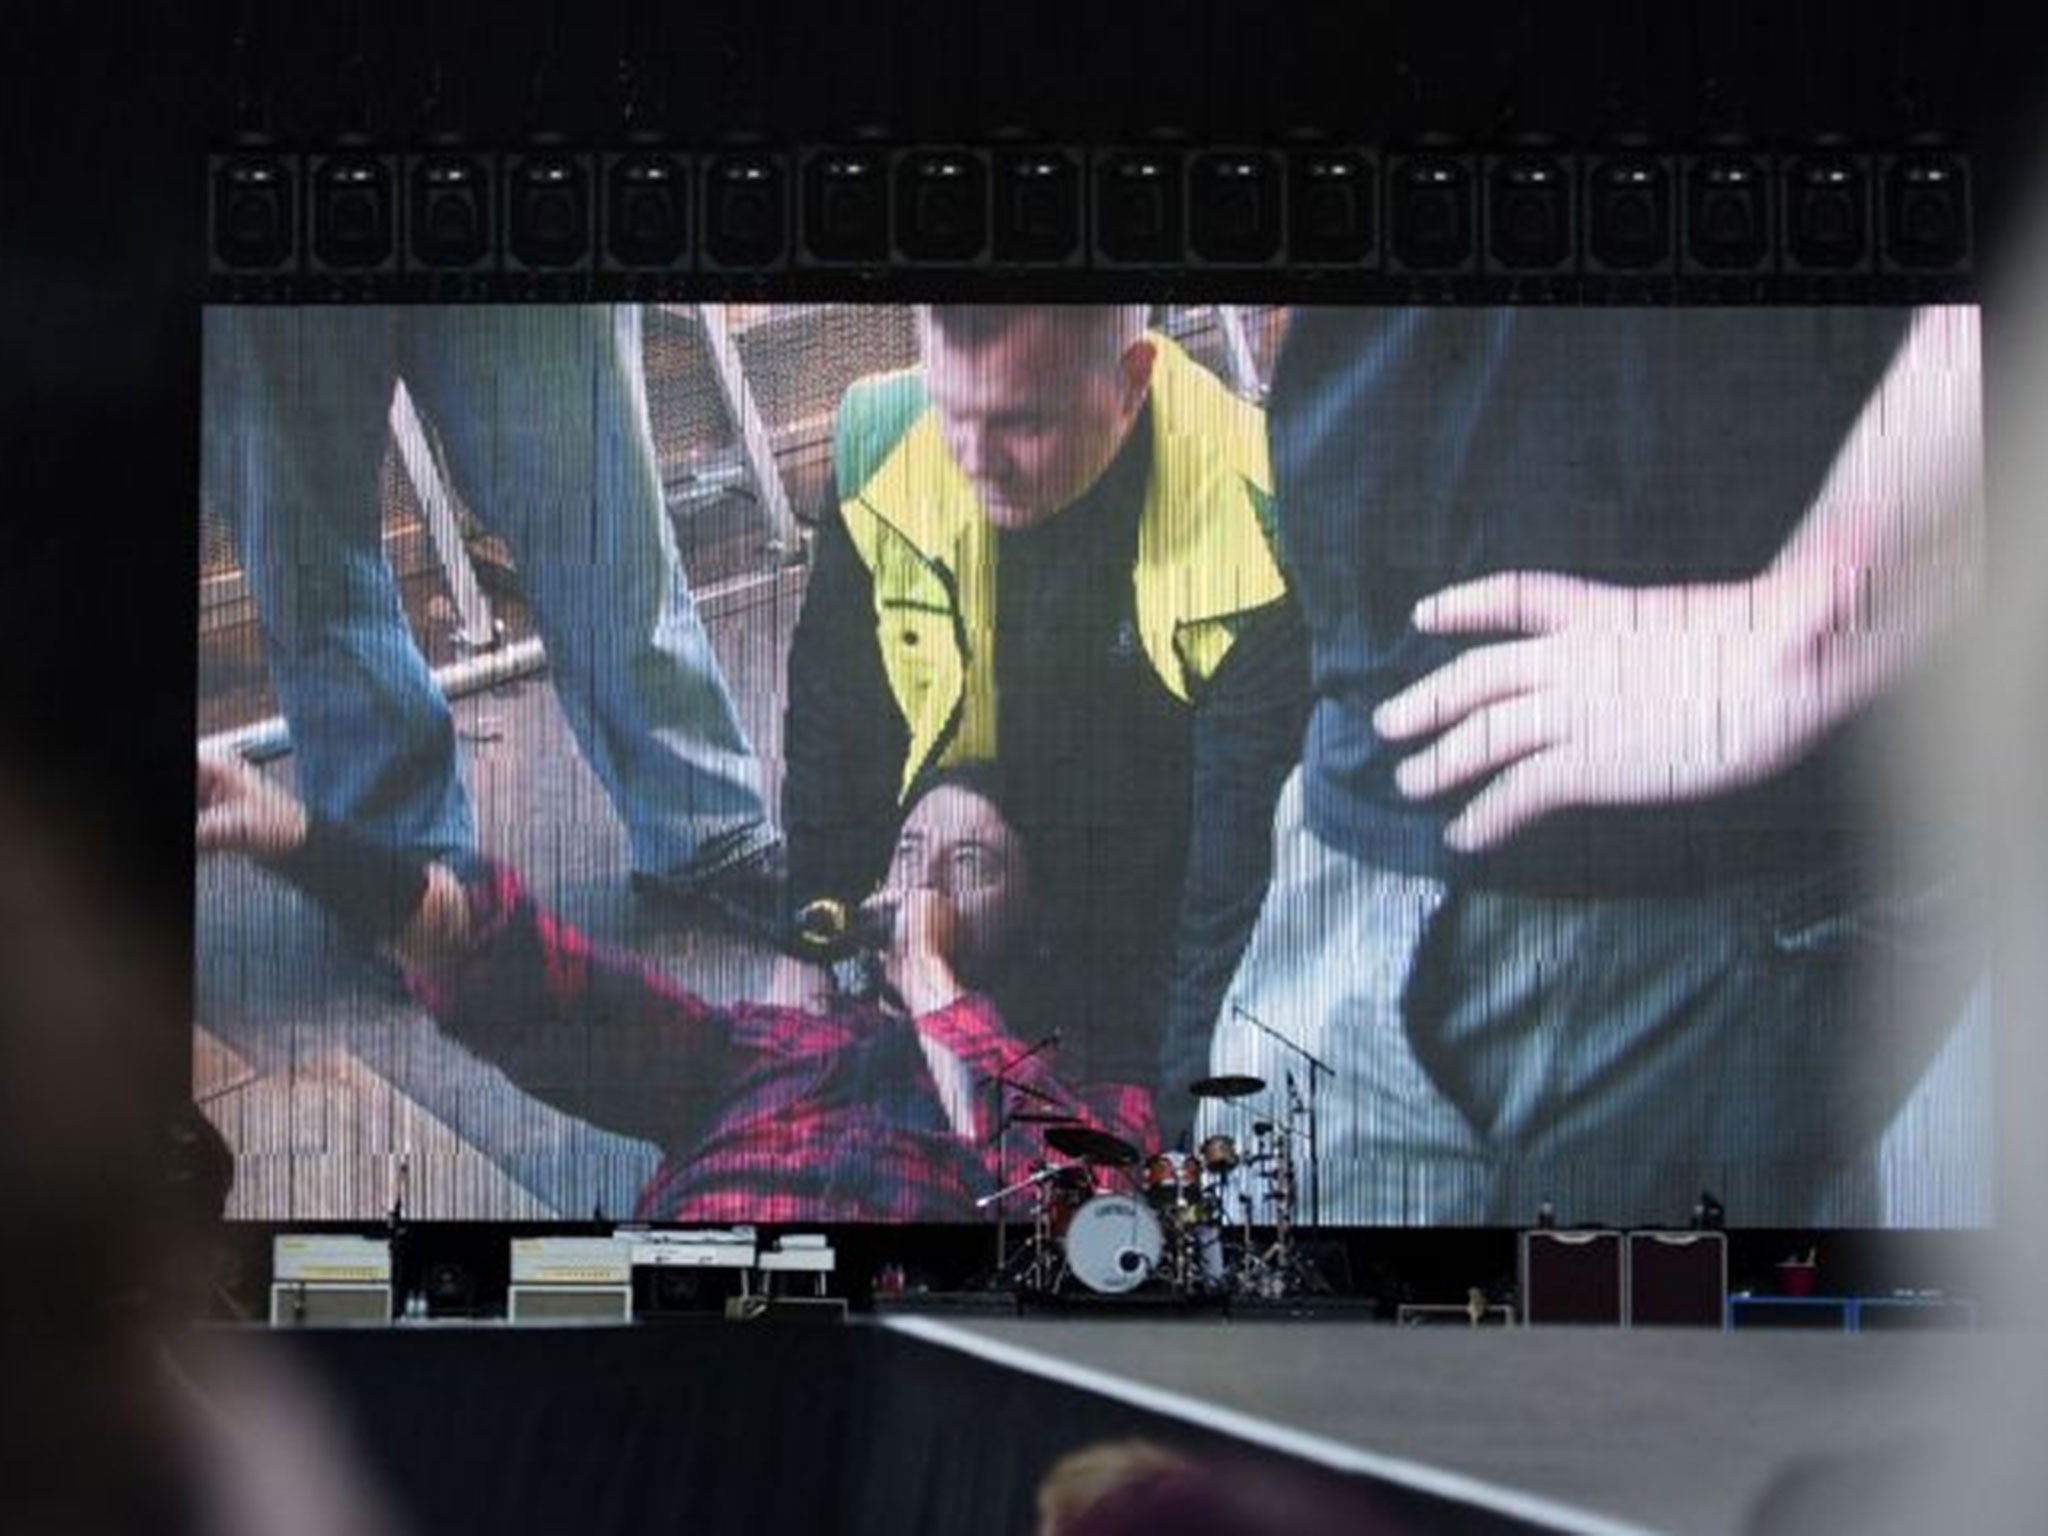 Dave Grohl shown on screen after he broke his leg in Sweden